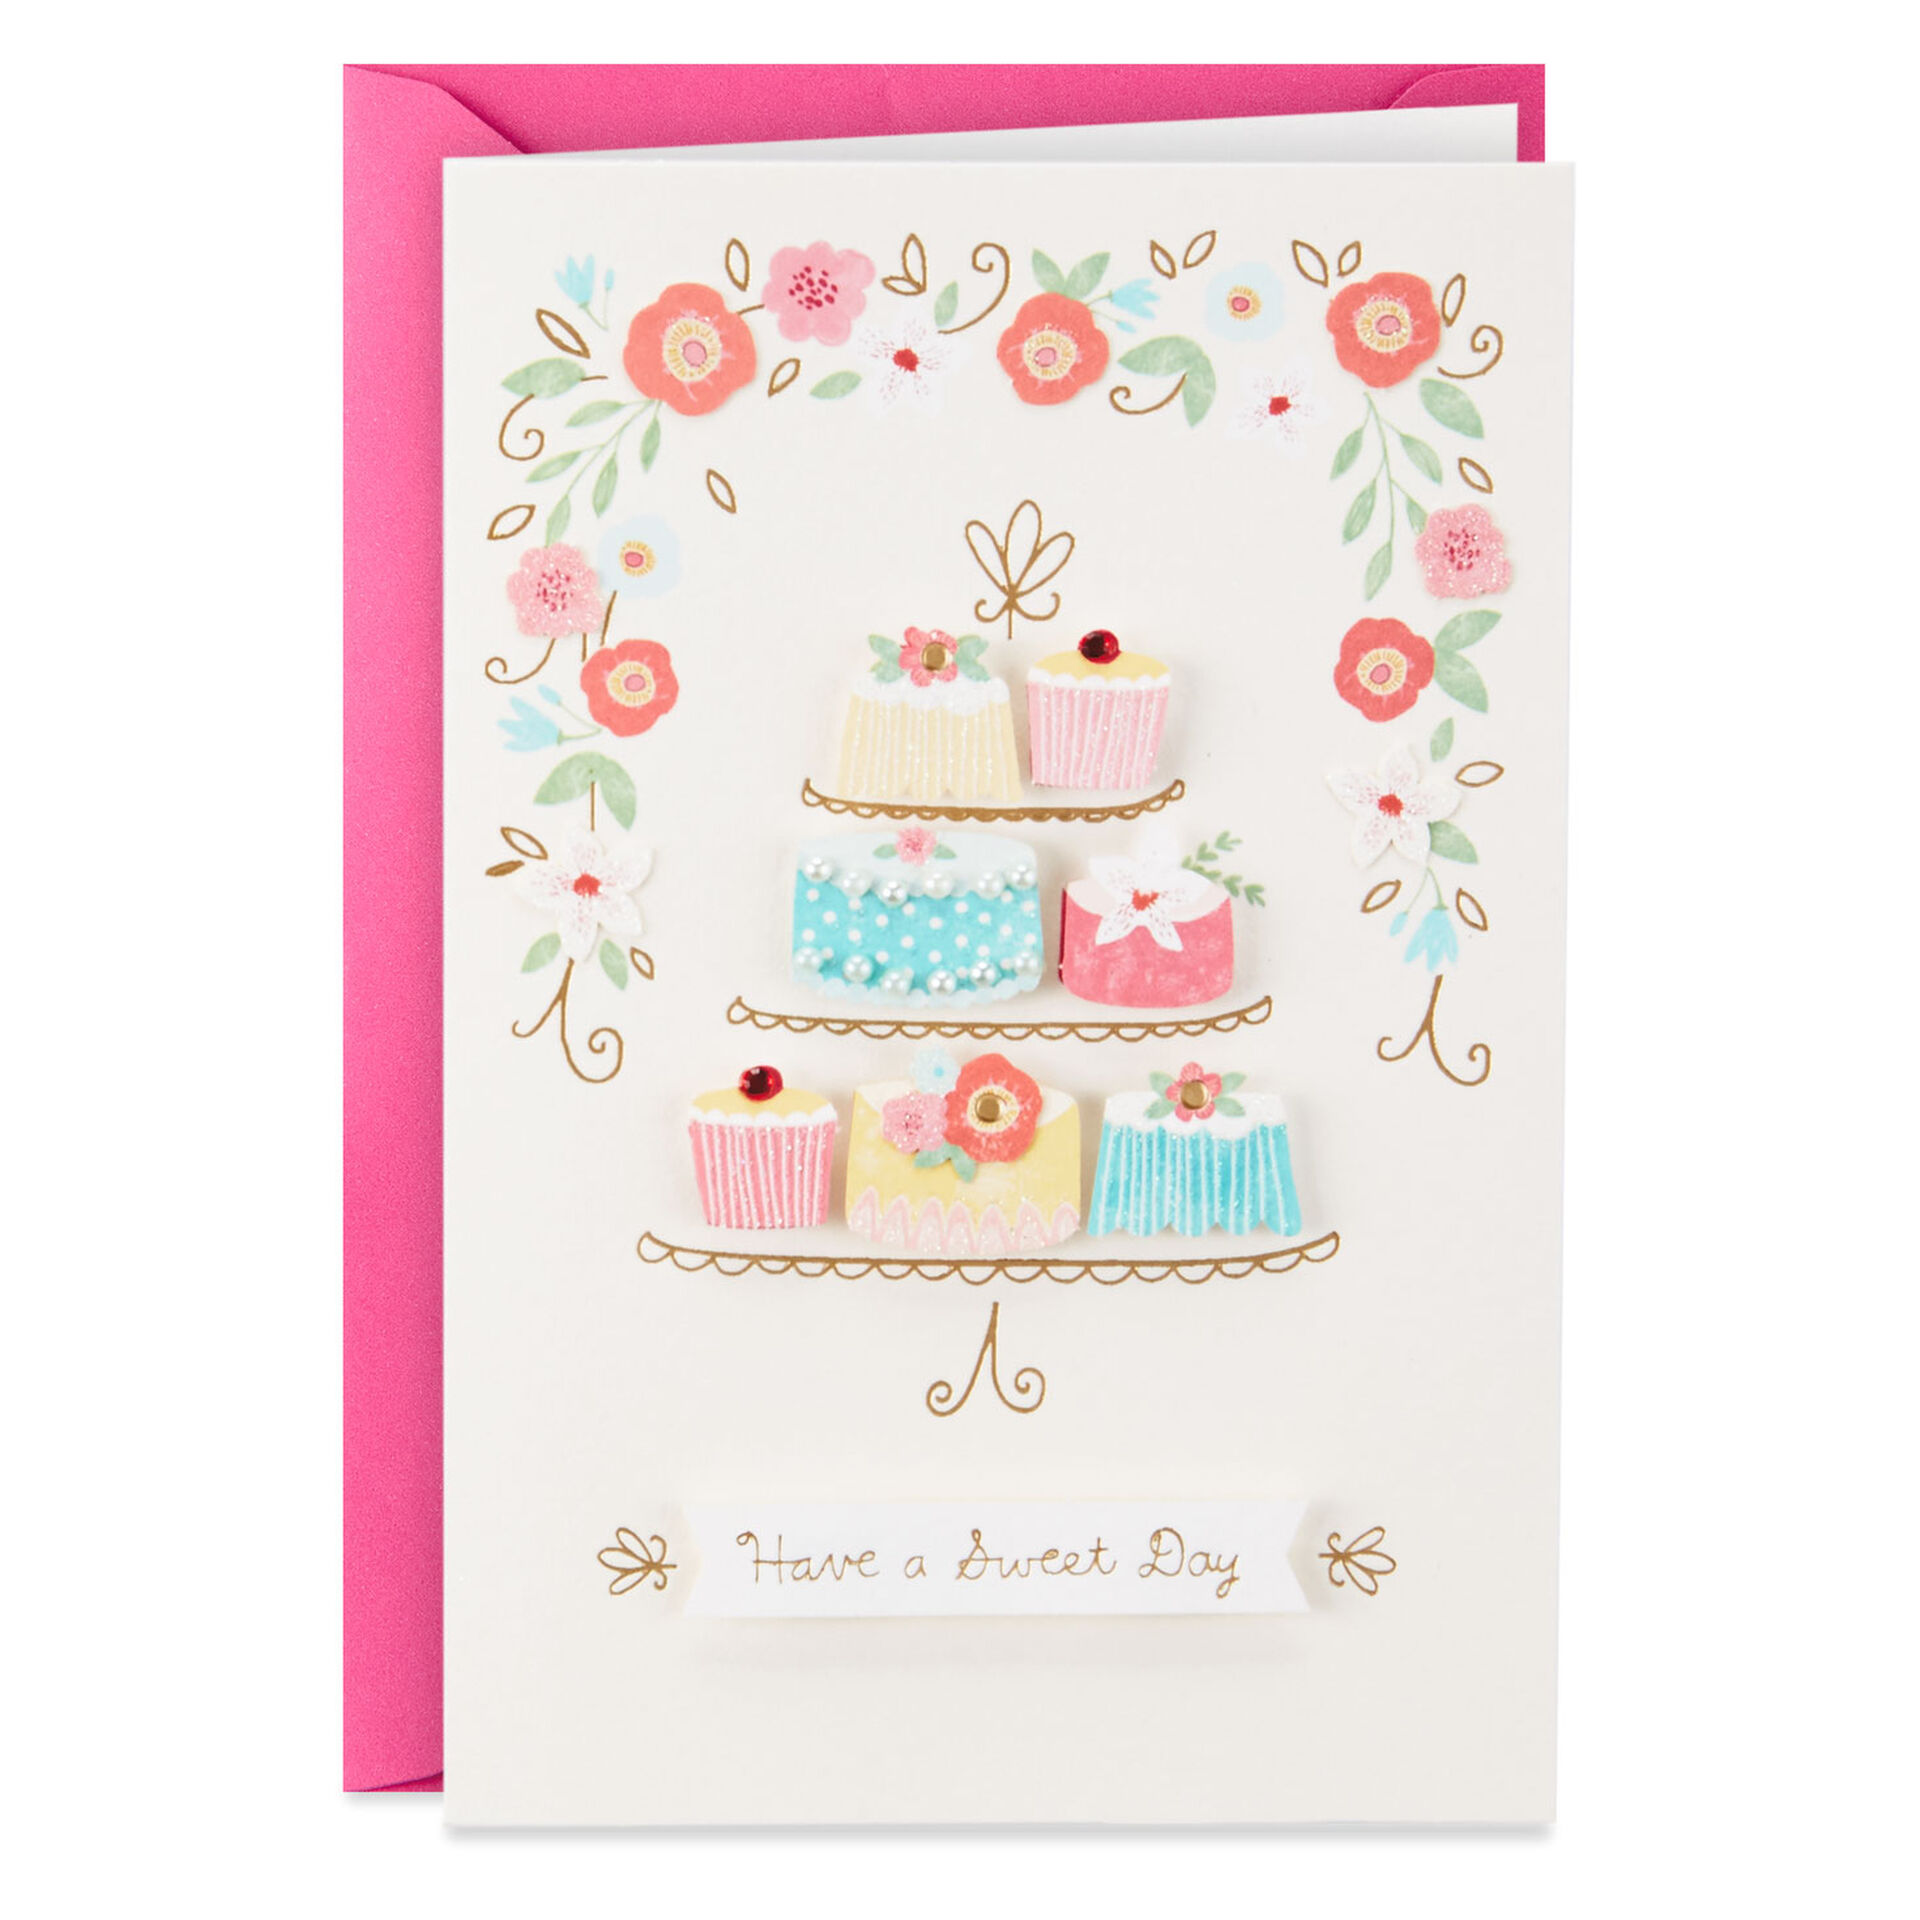 Mini-Cakes-&-Flowers-on-Stand-Birthday-Card-for-Her_599LAD9135_01